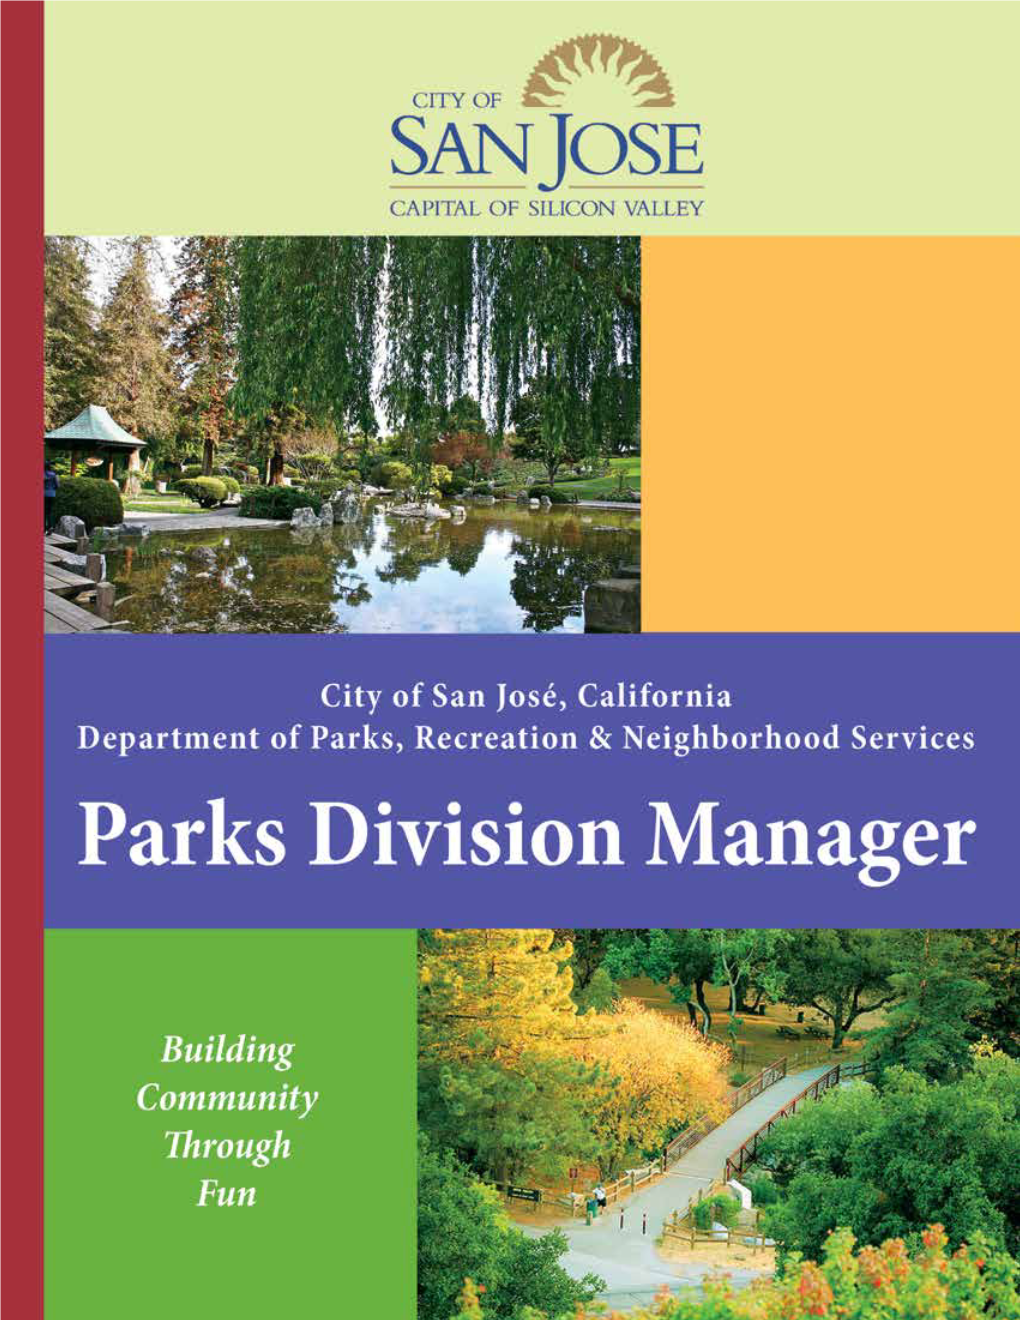 “Capital of Silicon Valley,” the City of San José Plays a Vital Economic the PARKS, RECREATION, and Cultural Role Anchoring the World’S Leading Region of Innovation